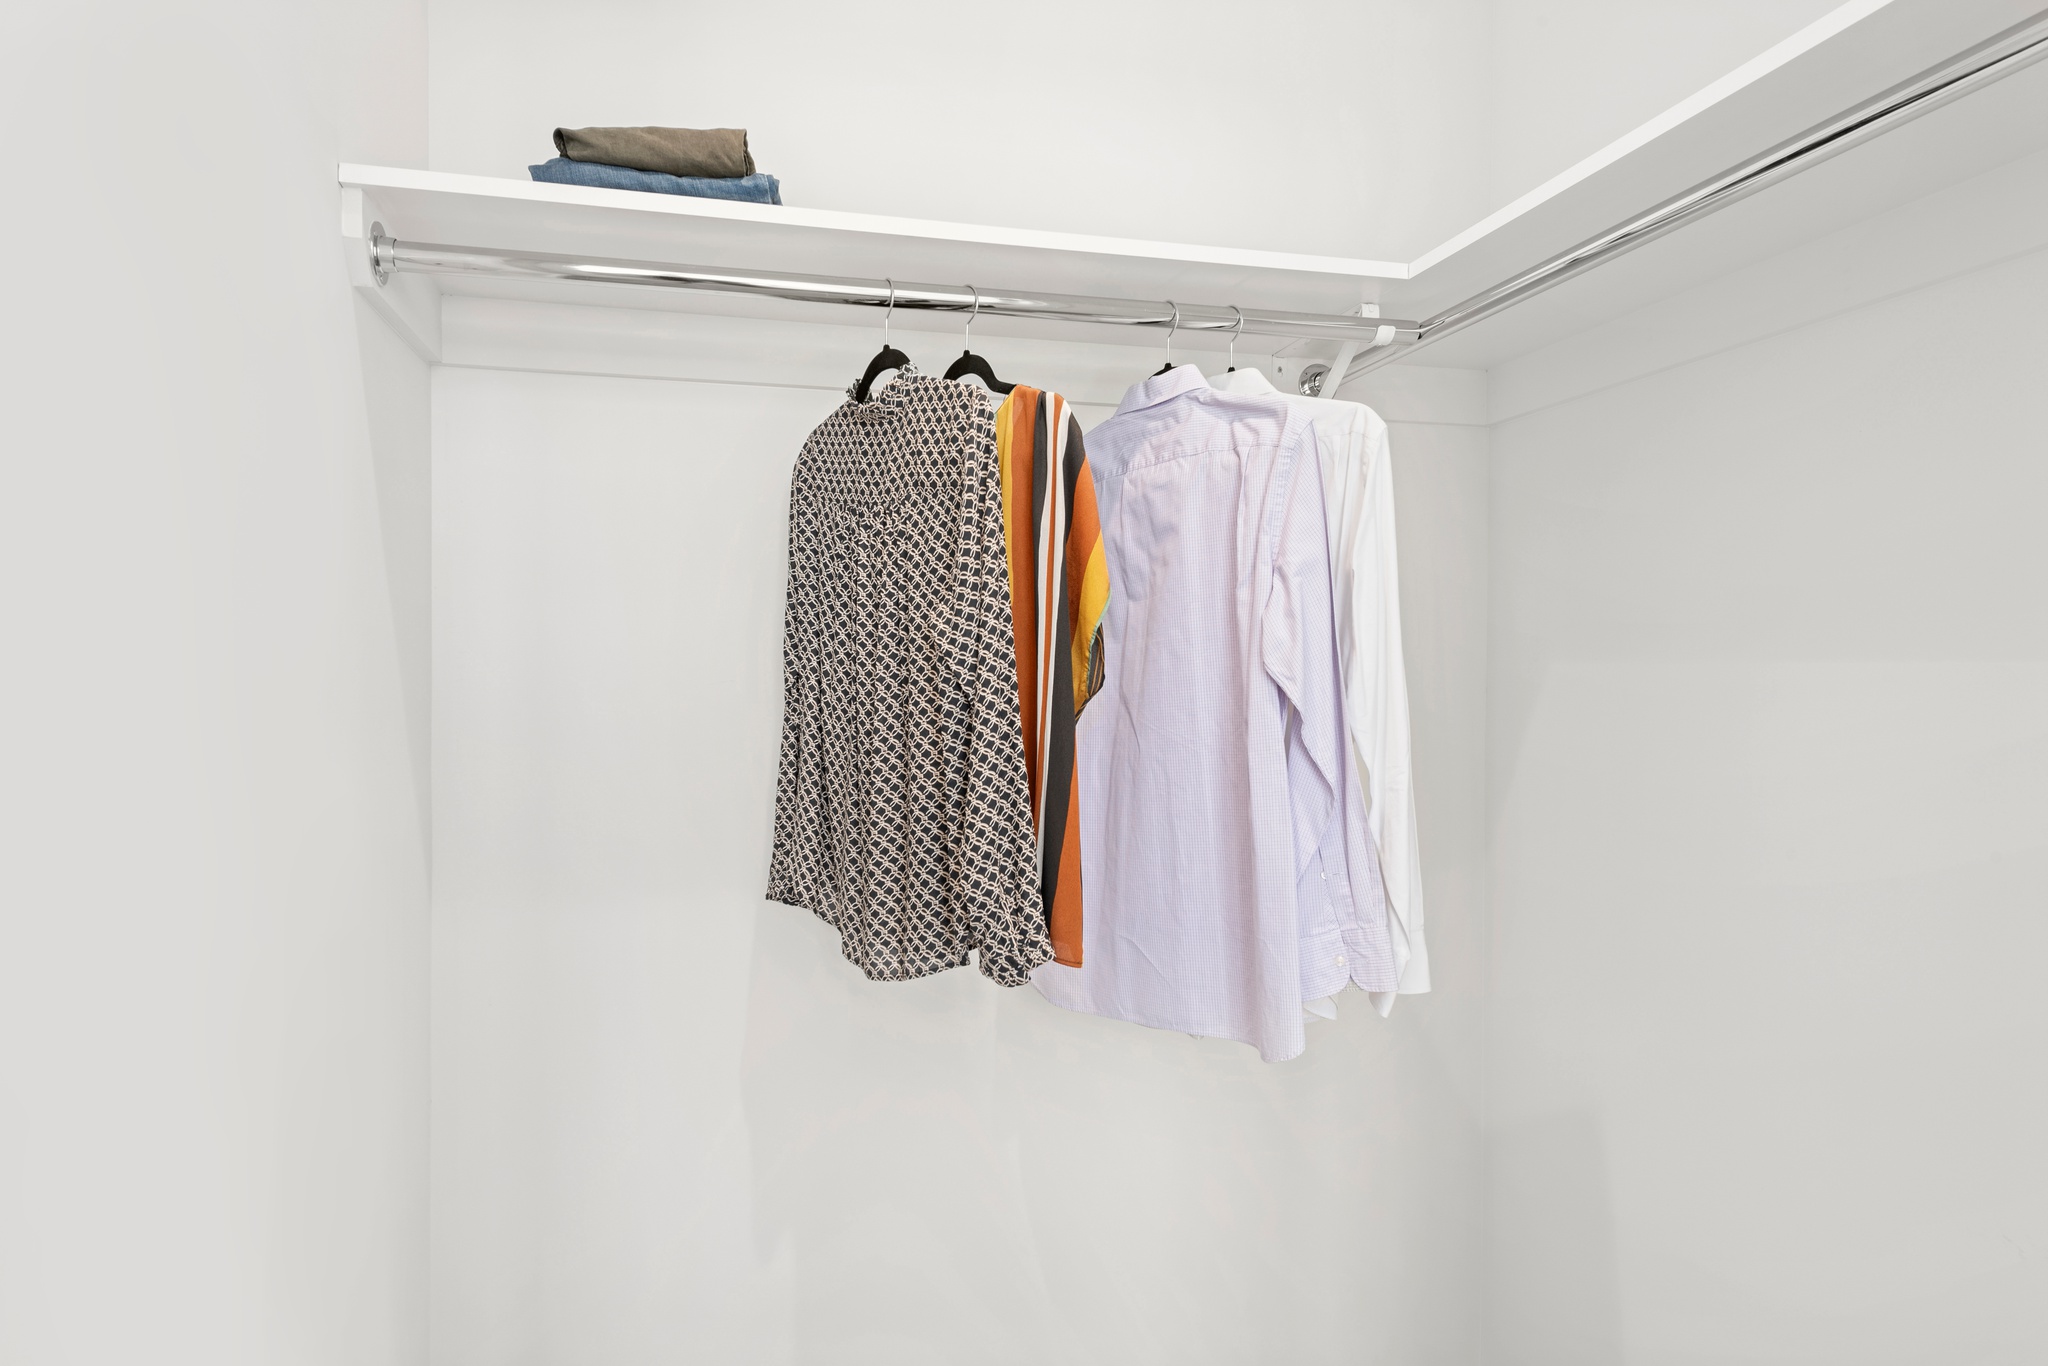 Spacious white closet with hanging bars with shirts hung and shelves above